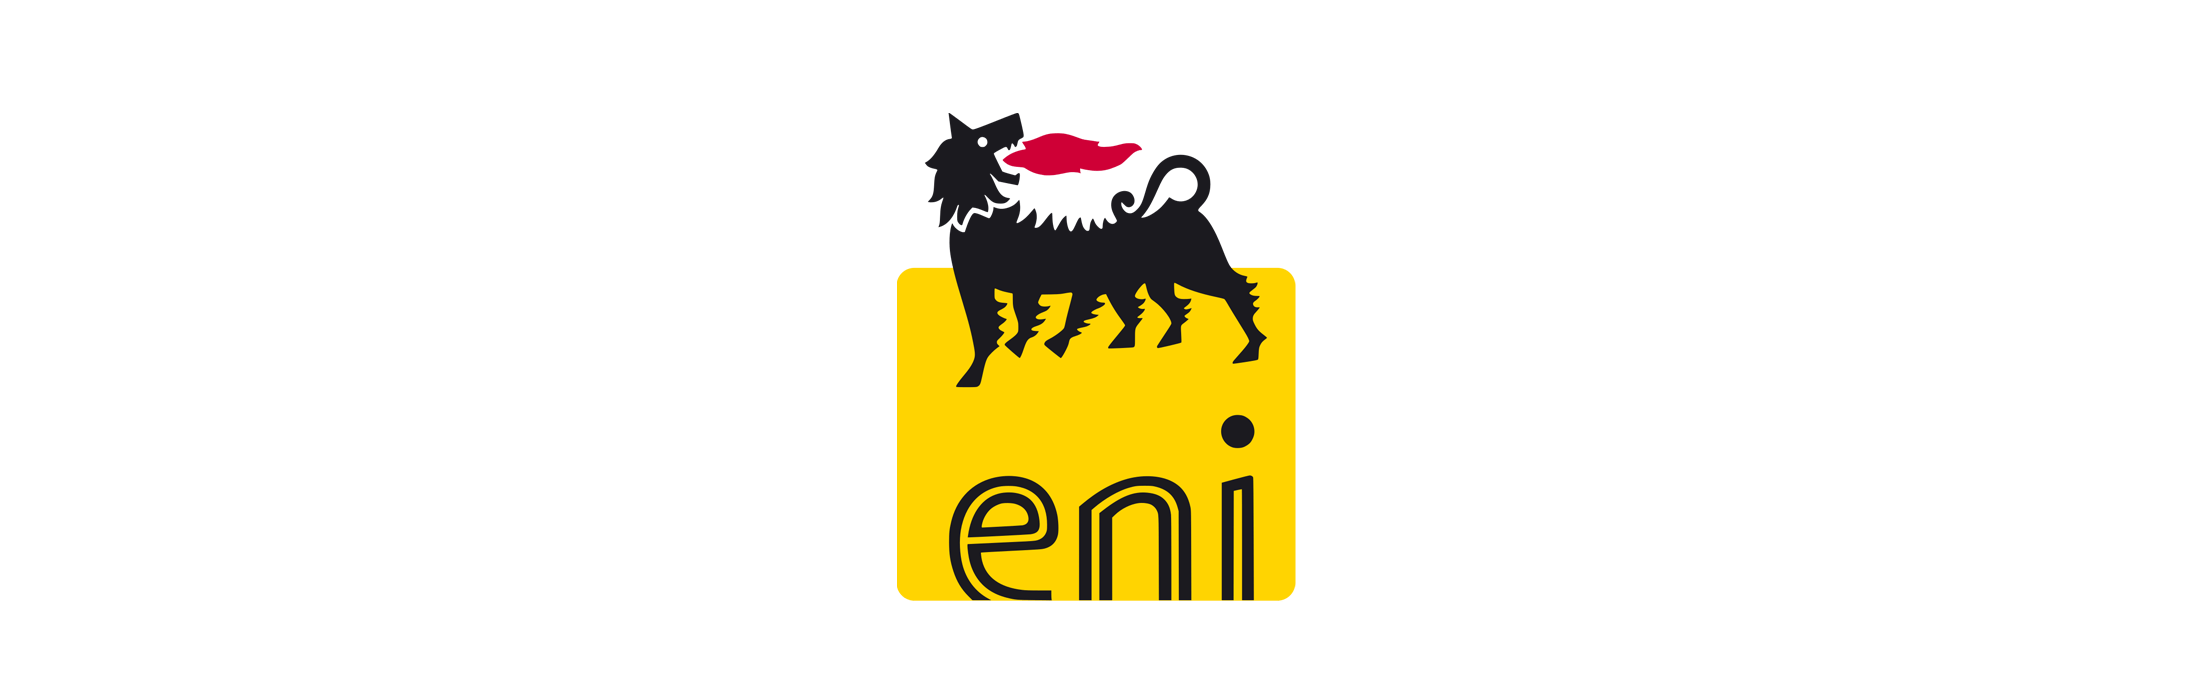 ENI.png